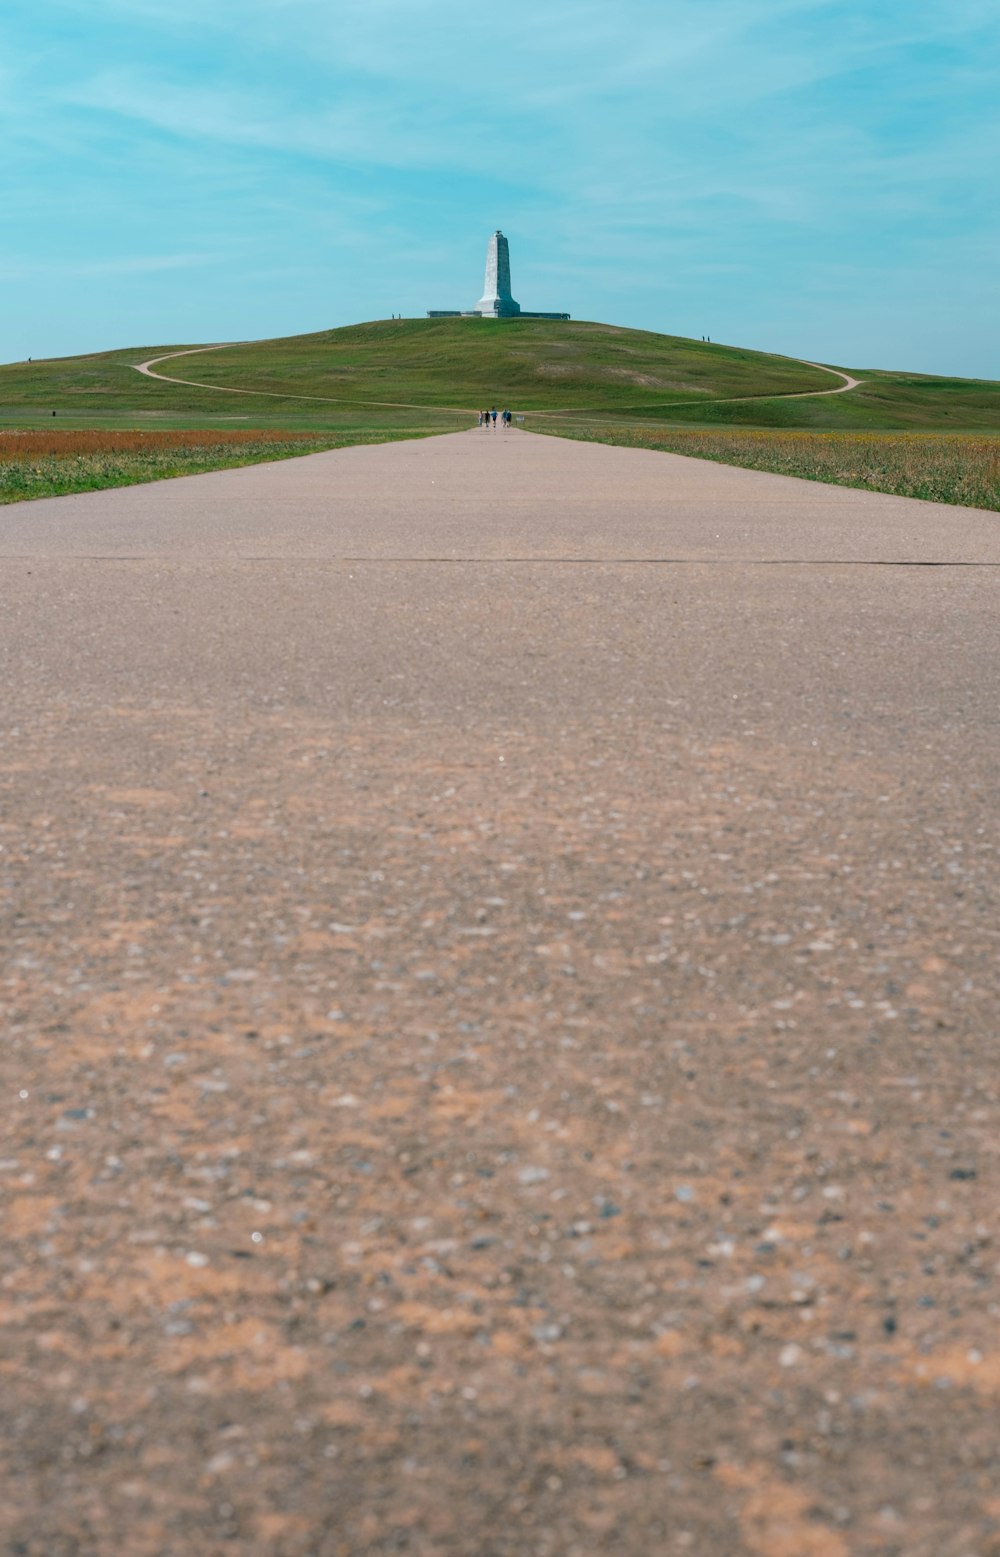 a person walking down a paved road towards a light house